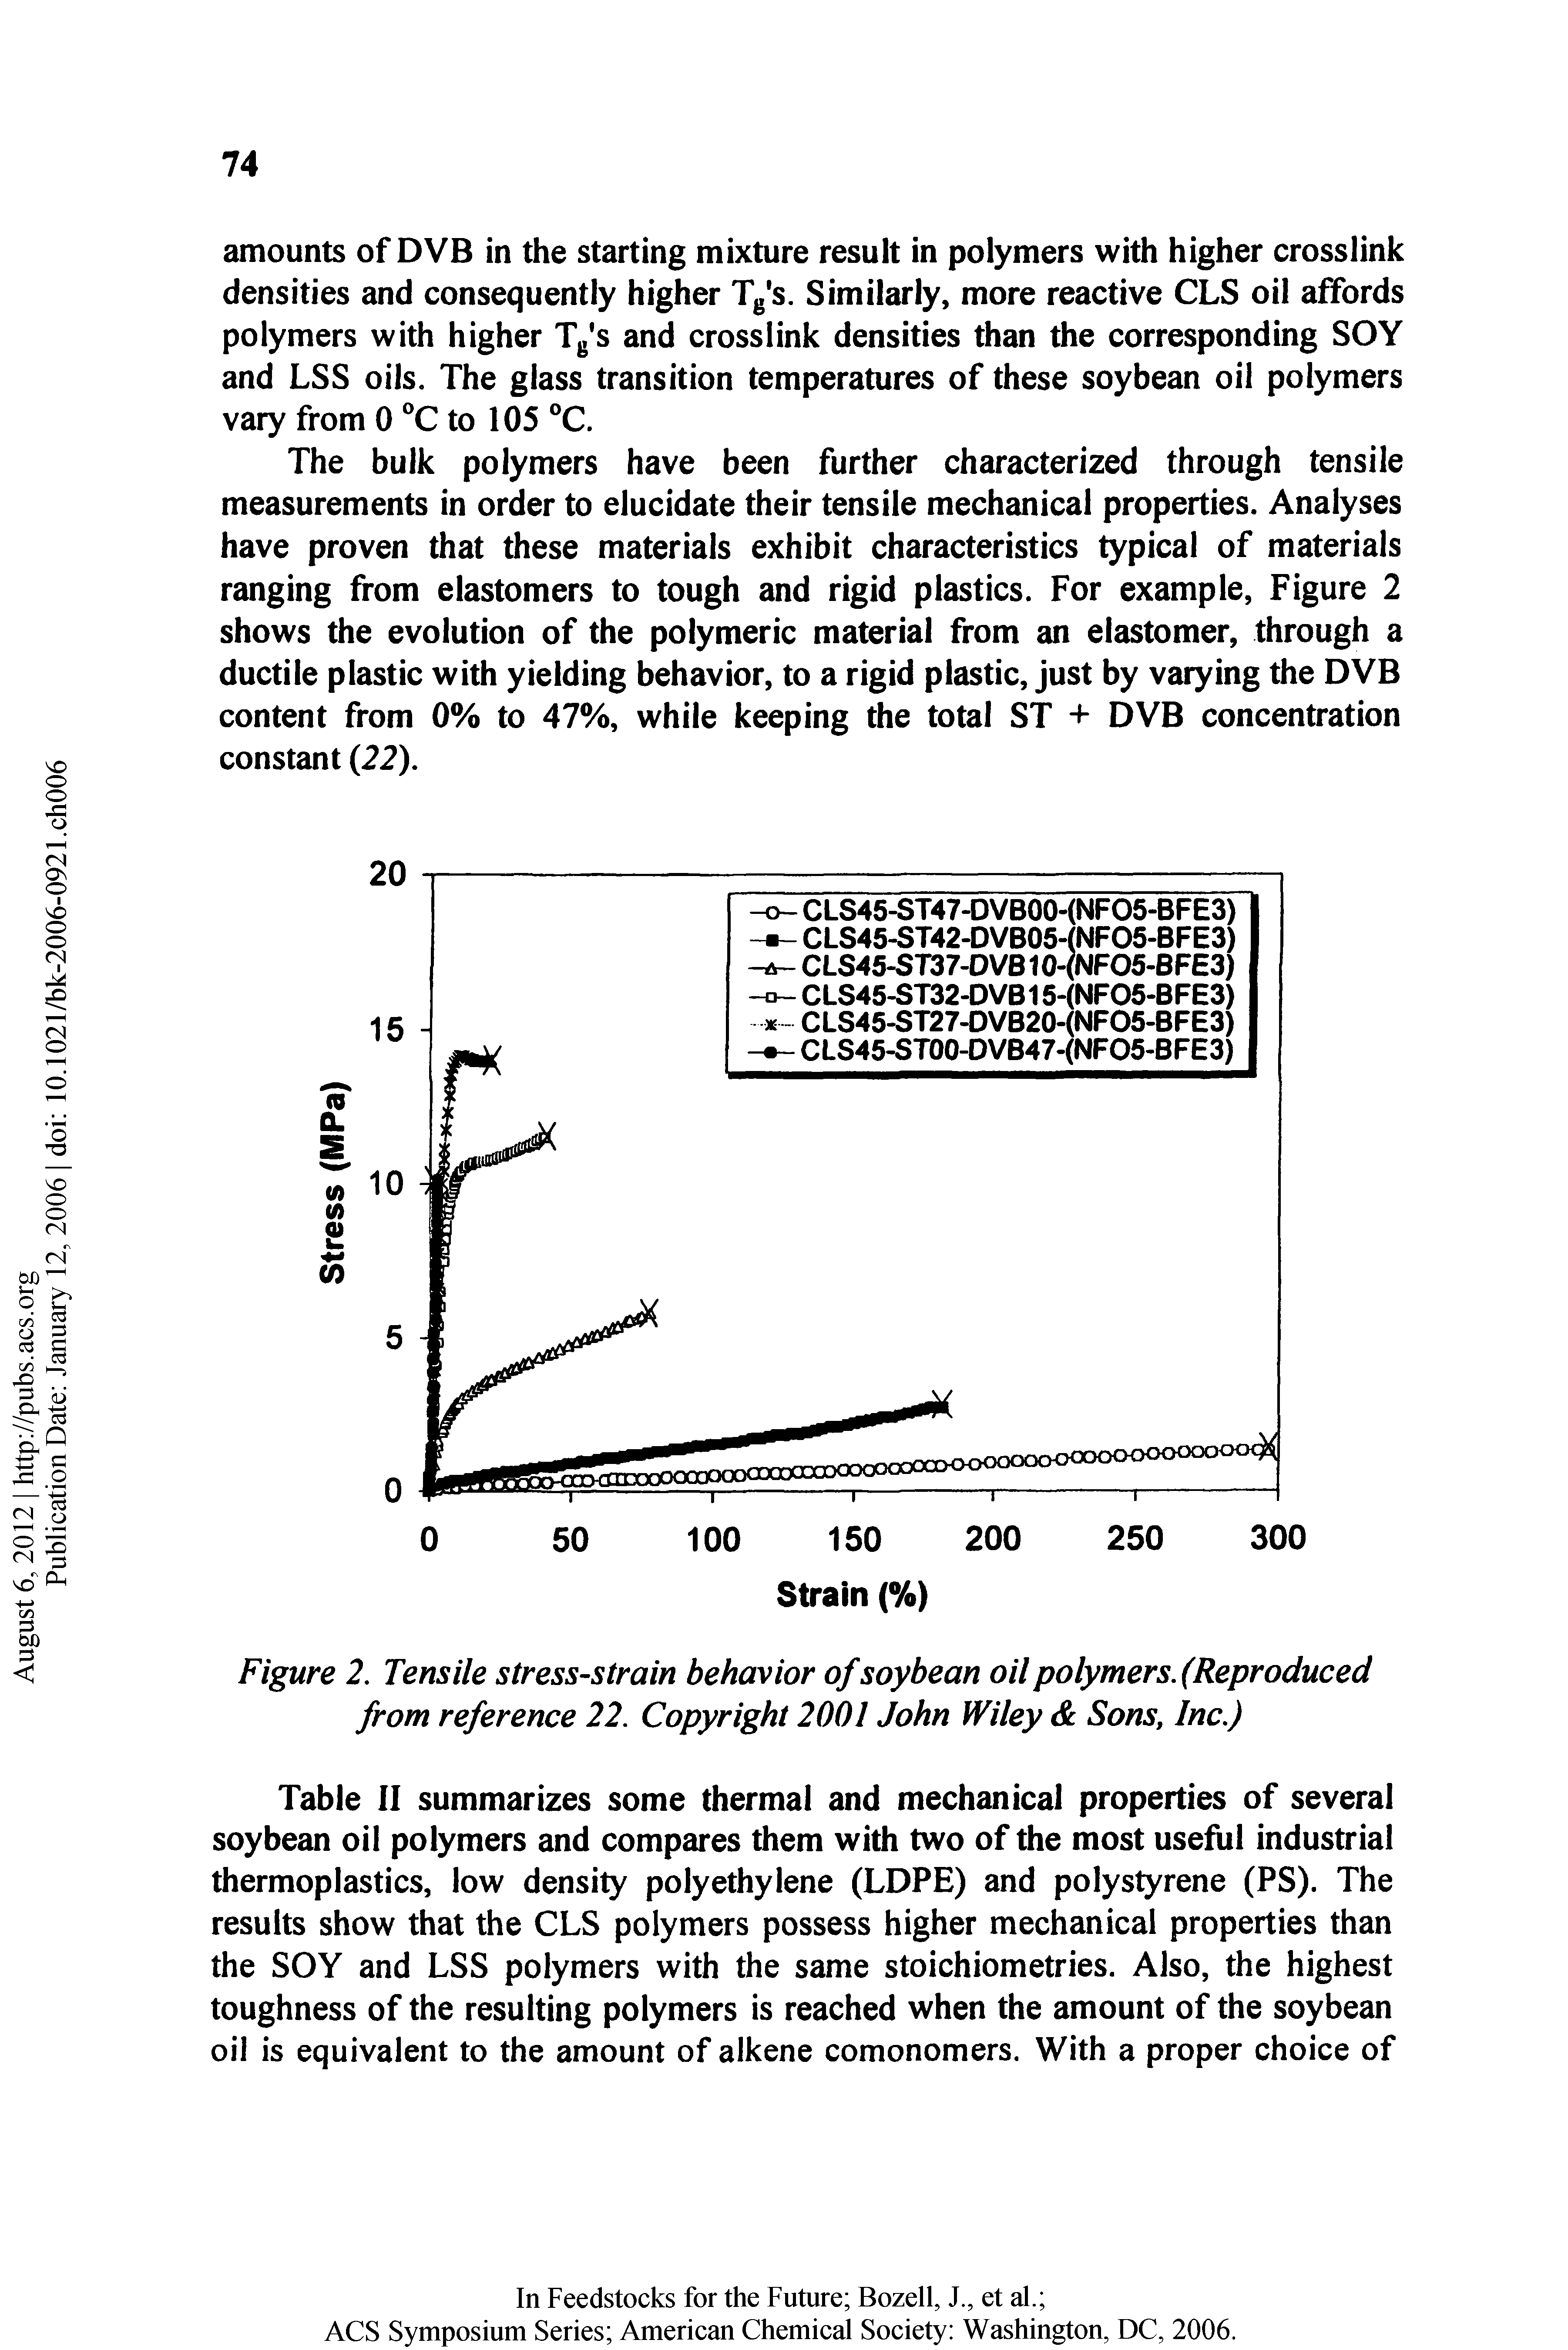 Table II summarizes some thermal and mechanical properties of several soybean oil polymers and compares them with two of the most useful industrial thermoplastics, low density polyethylene (LDPE) and polystyrene (PS). The results show that the CLS polymers possess higher mechanical properties than the SOY and LSS polymers with the same stoichiometries. Also, the highest toughness of the resulting polymers is reached when the amount of the soybean oil is equivalent to the amount of alkene comonomers. With a proper choice of...